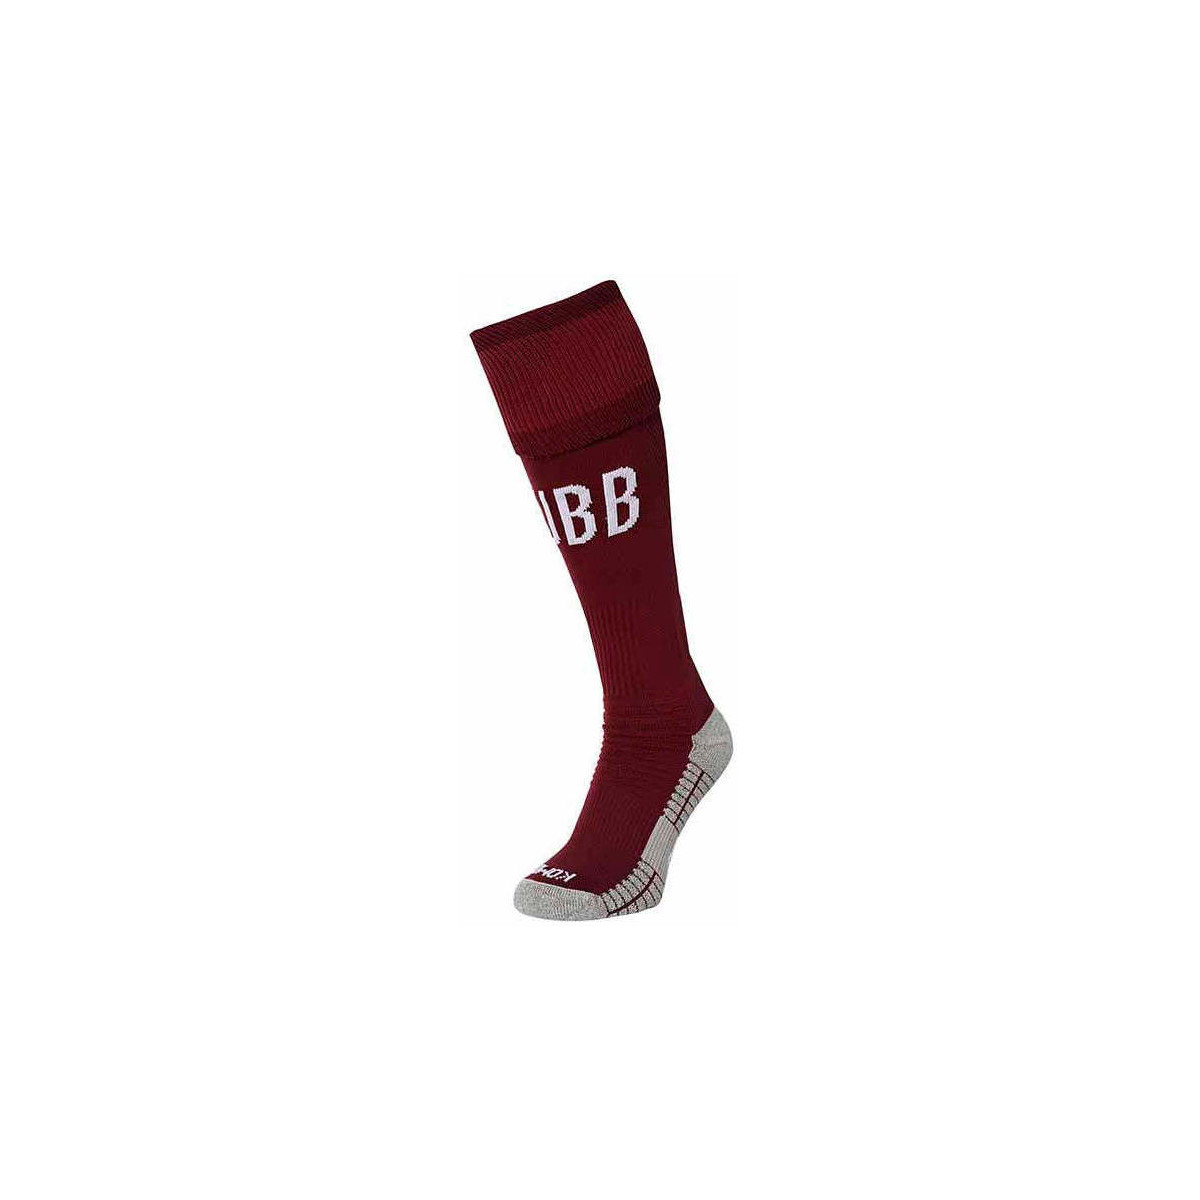 Kappa Violet Chaussettes Kombat Spark Pro UBB Rugby 22/23 wCqMUfpc